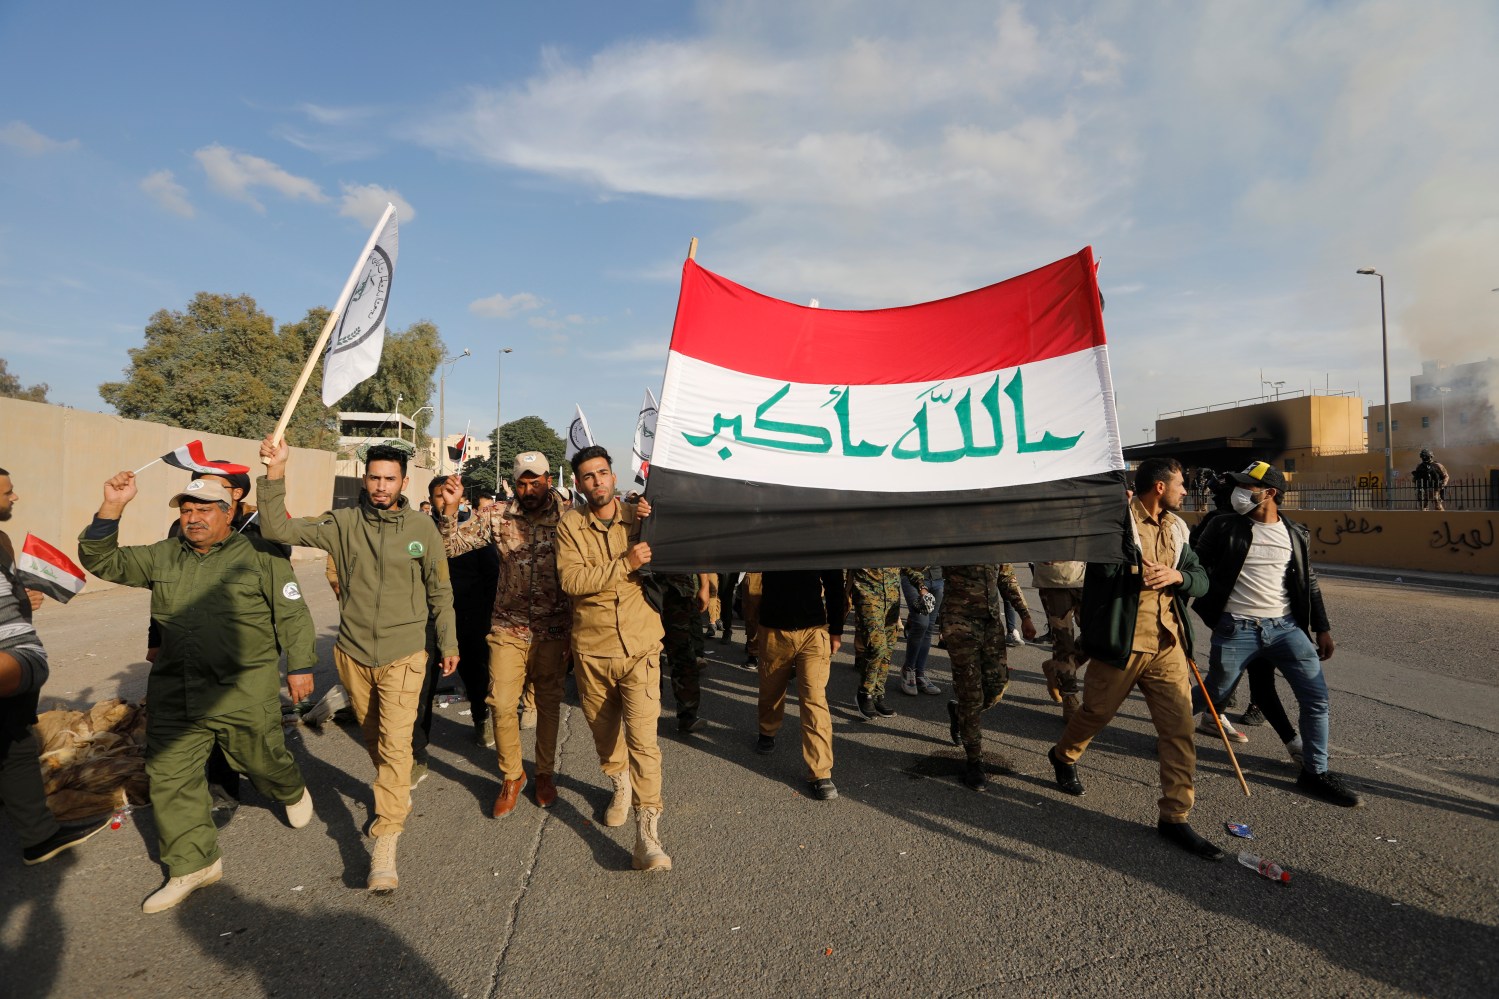 Protesters and militia fighters carry an Iraqi flag outside the U.S. Embassy during a protest to condemn air strikes on bases belonging to Hashd al-Shaabi (paramilitary forces), in Baghdad, Iraq January 1, 2020. REUTERS/Khalid al-Mousily